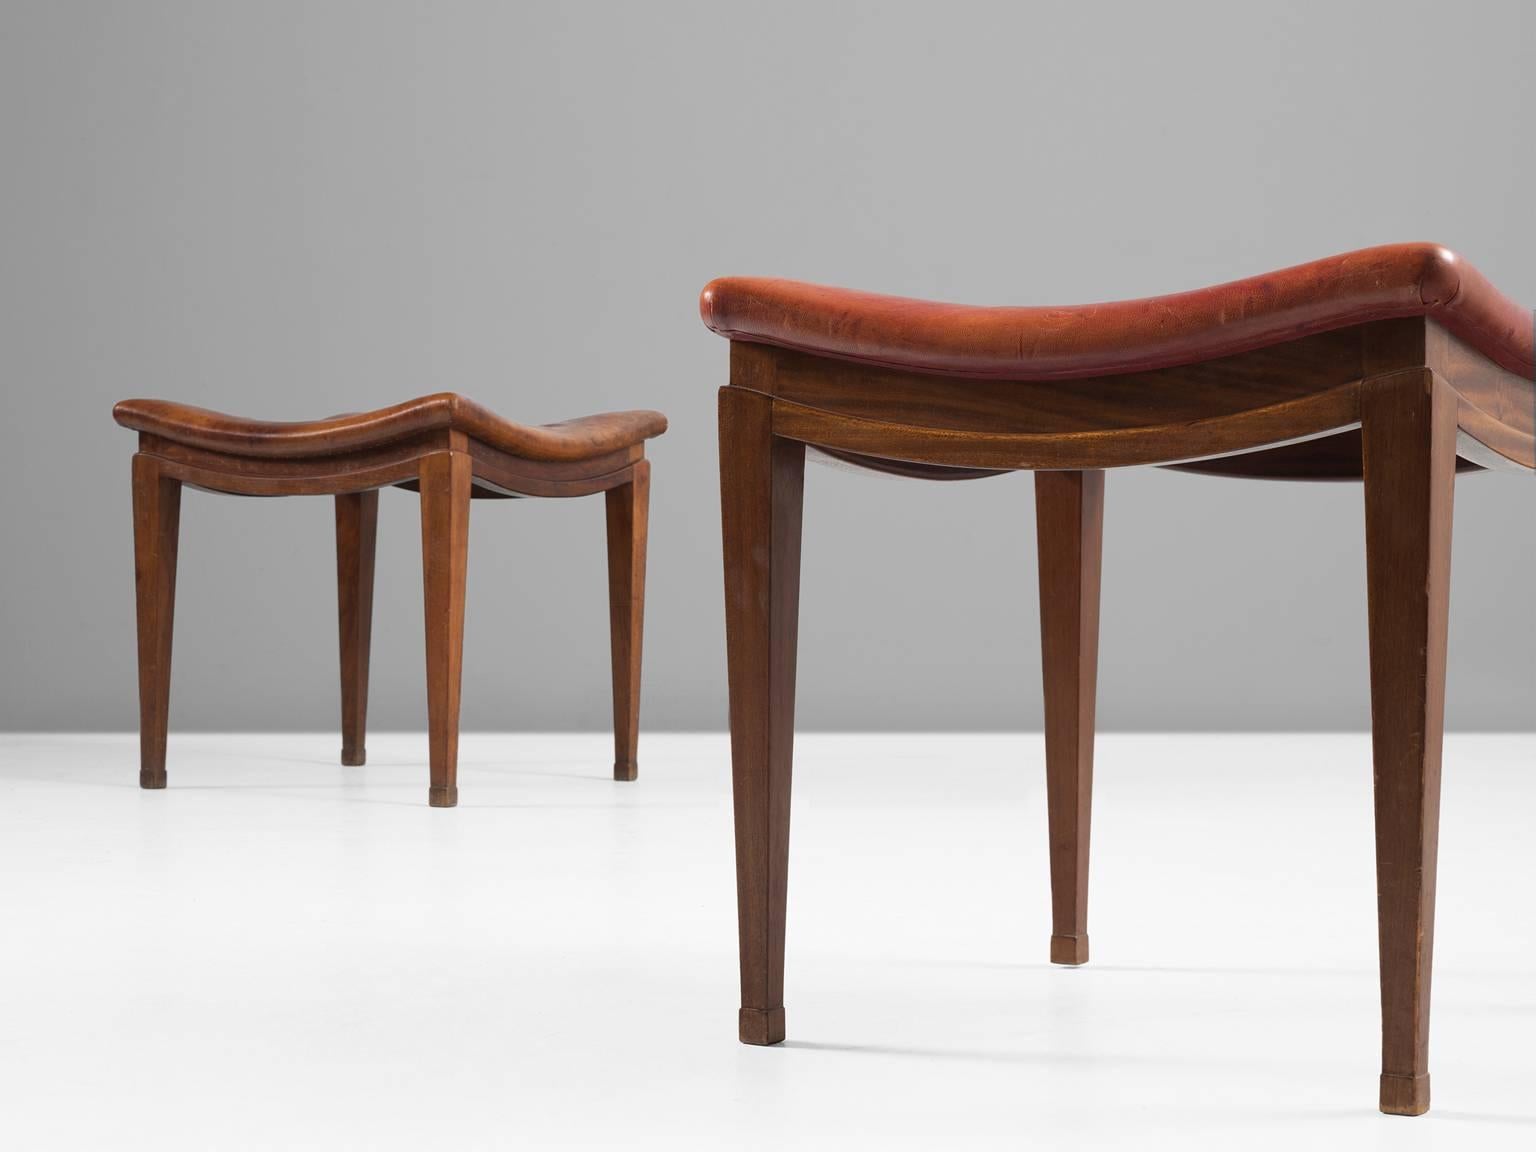 Scandinavian Modern Frits Henningsen Pair of Stools in Mahogany and Patinated Leather 